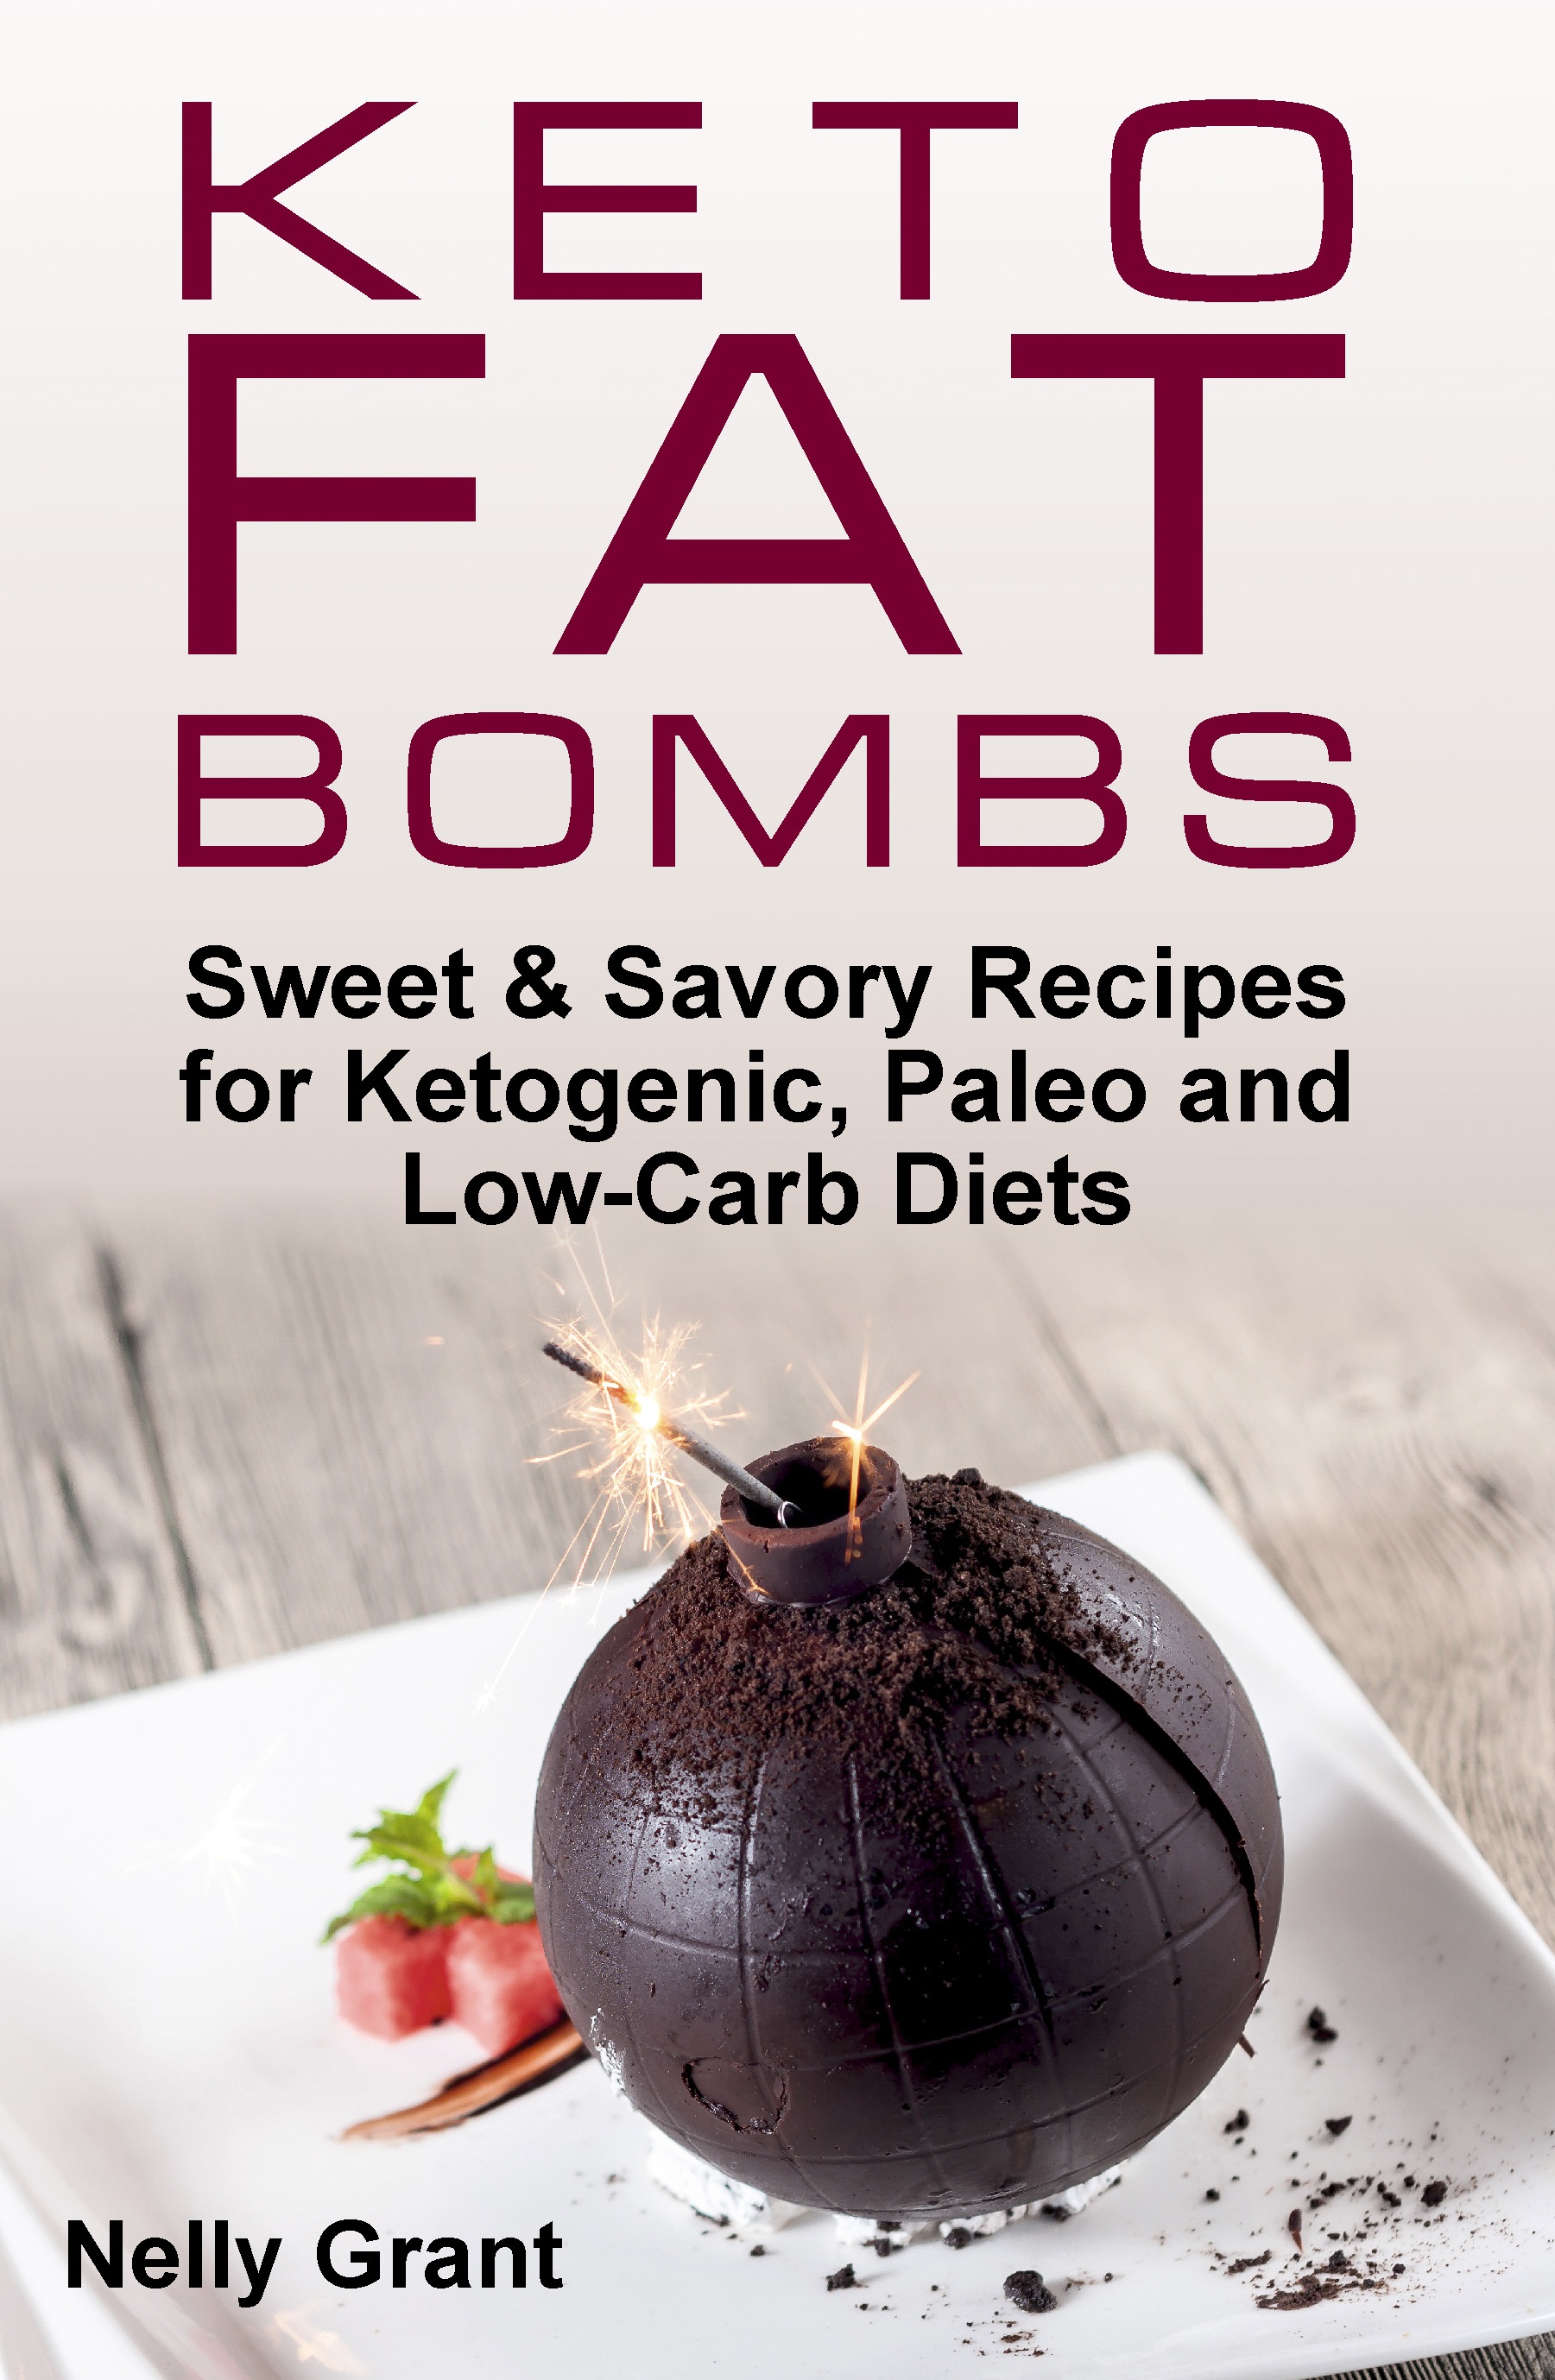 FREE: Keto Fat Bombs: Sweet & Savory Recipes for Ketogenic, Paleo and Low-Carb Diets by Nelly Grant